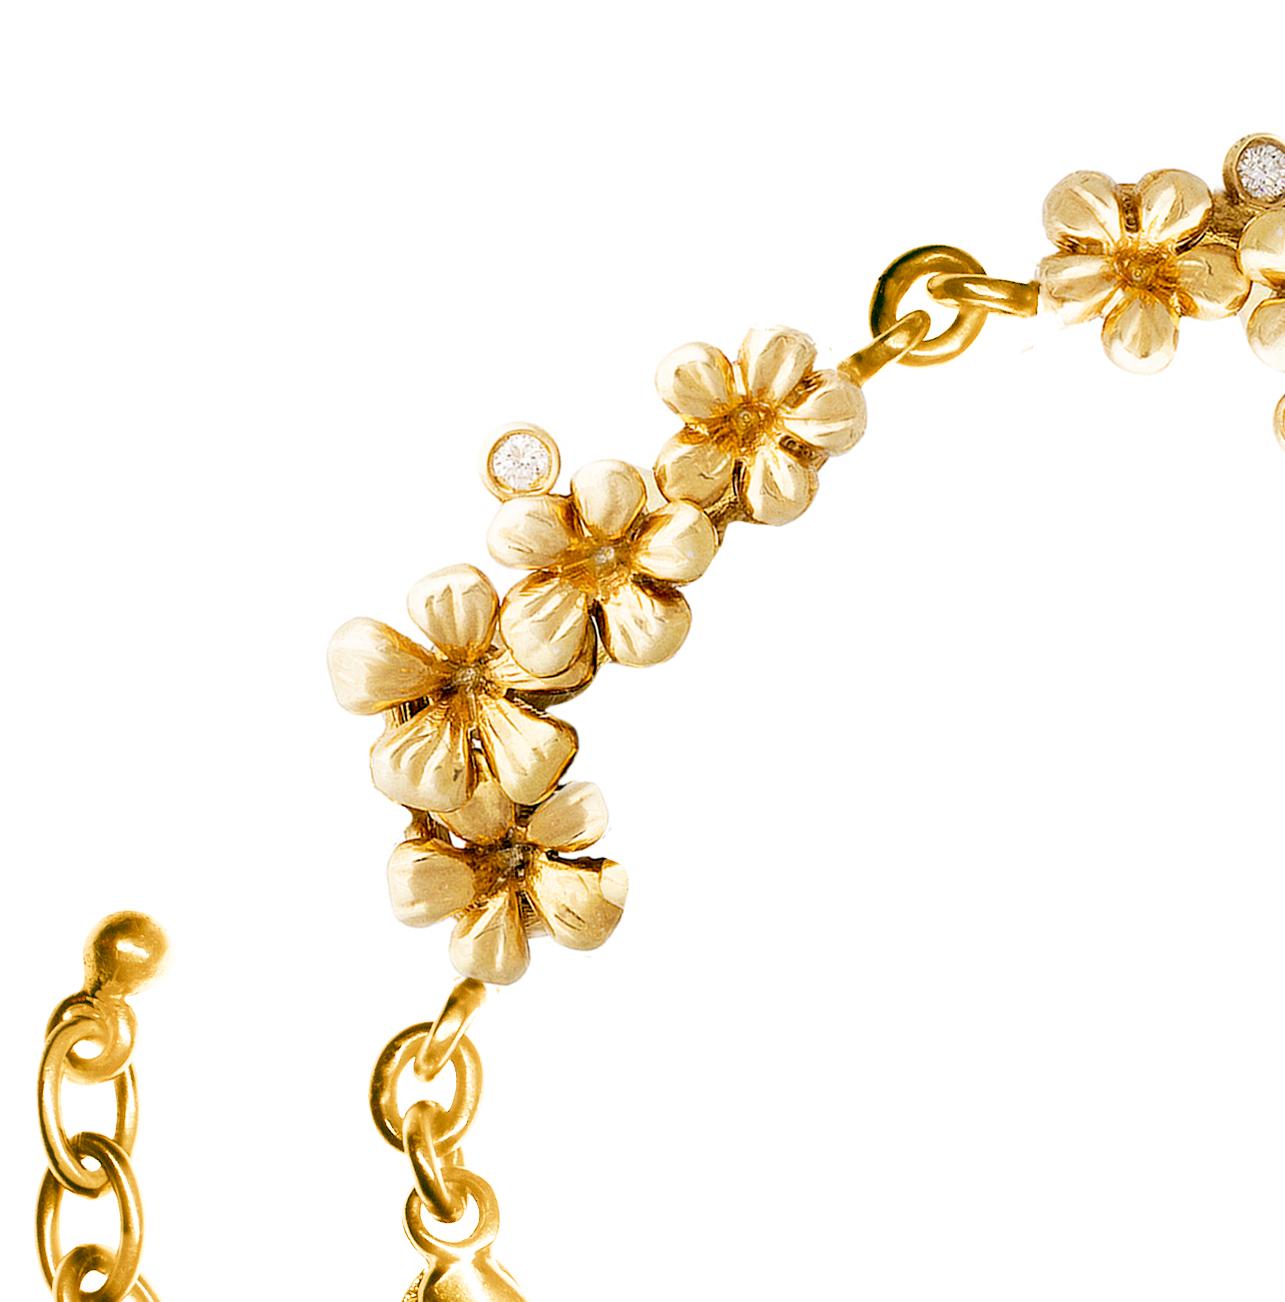 This contemporary link bracelet from the Plum Blossom collection is crafted from 18 karat yellow gold and features 8 round diamonds (0.24 carat). The intricate design of the petals adds an extra level of shine to the gold, while the diamonds provide